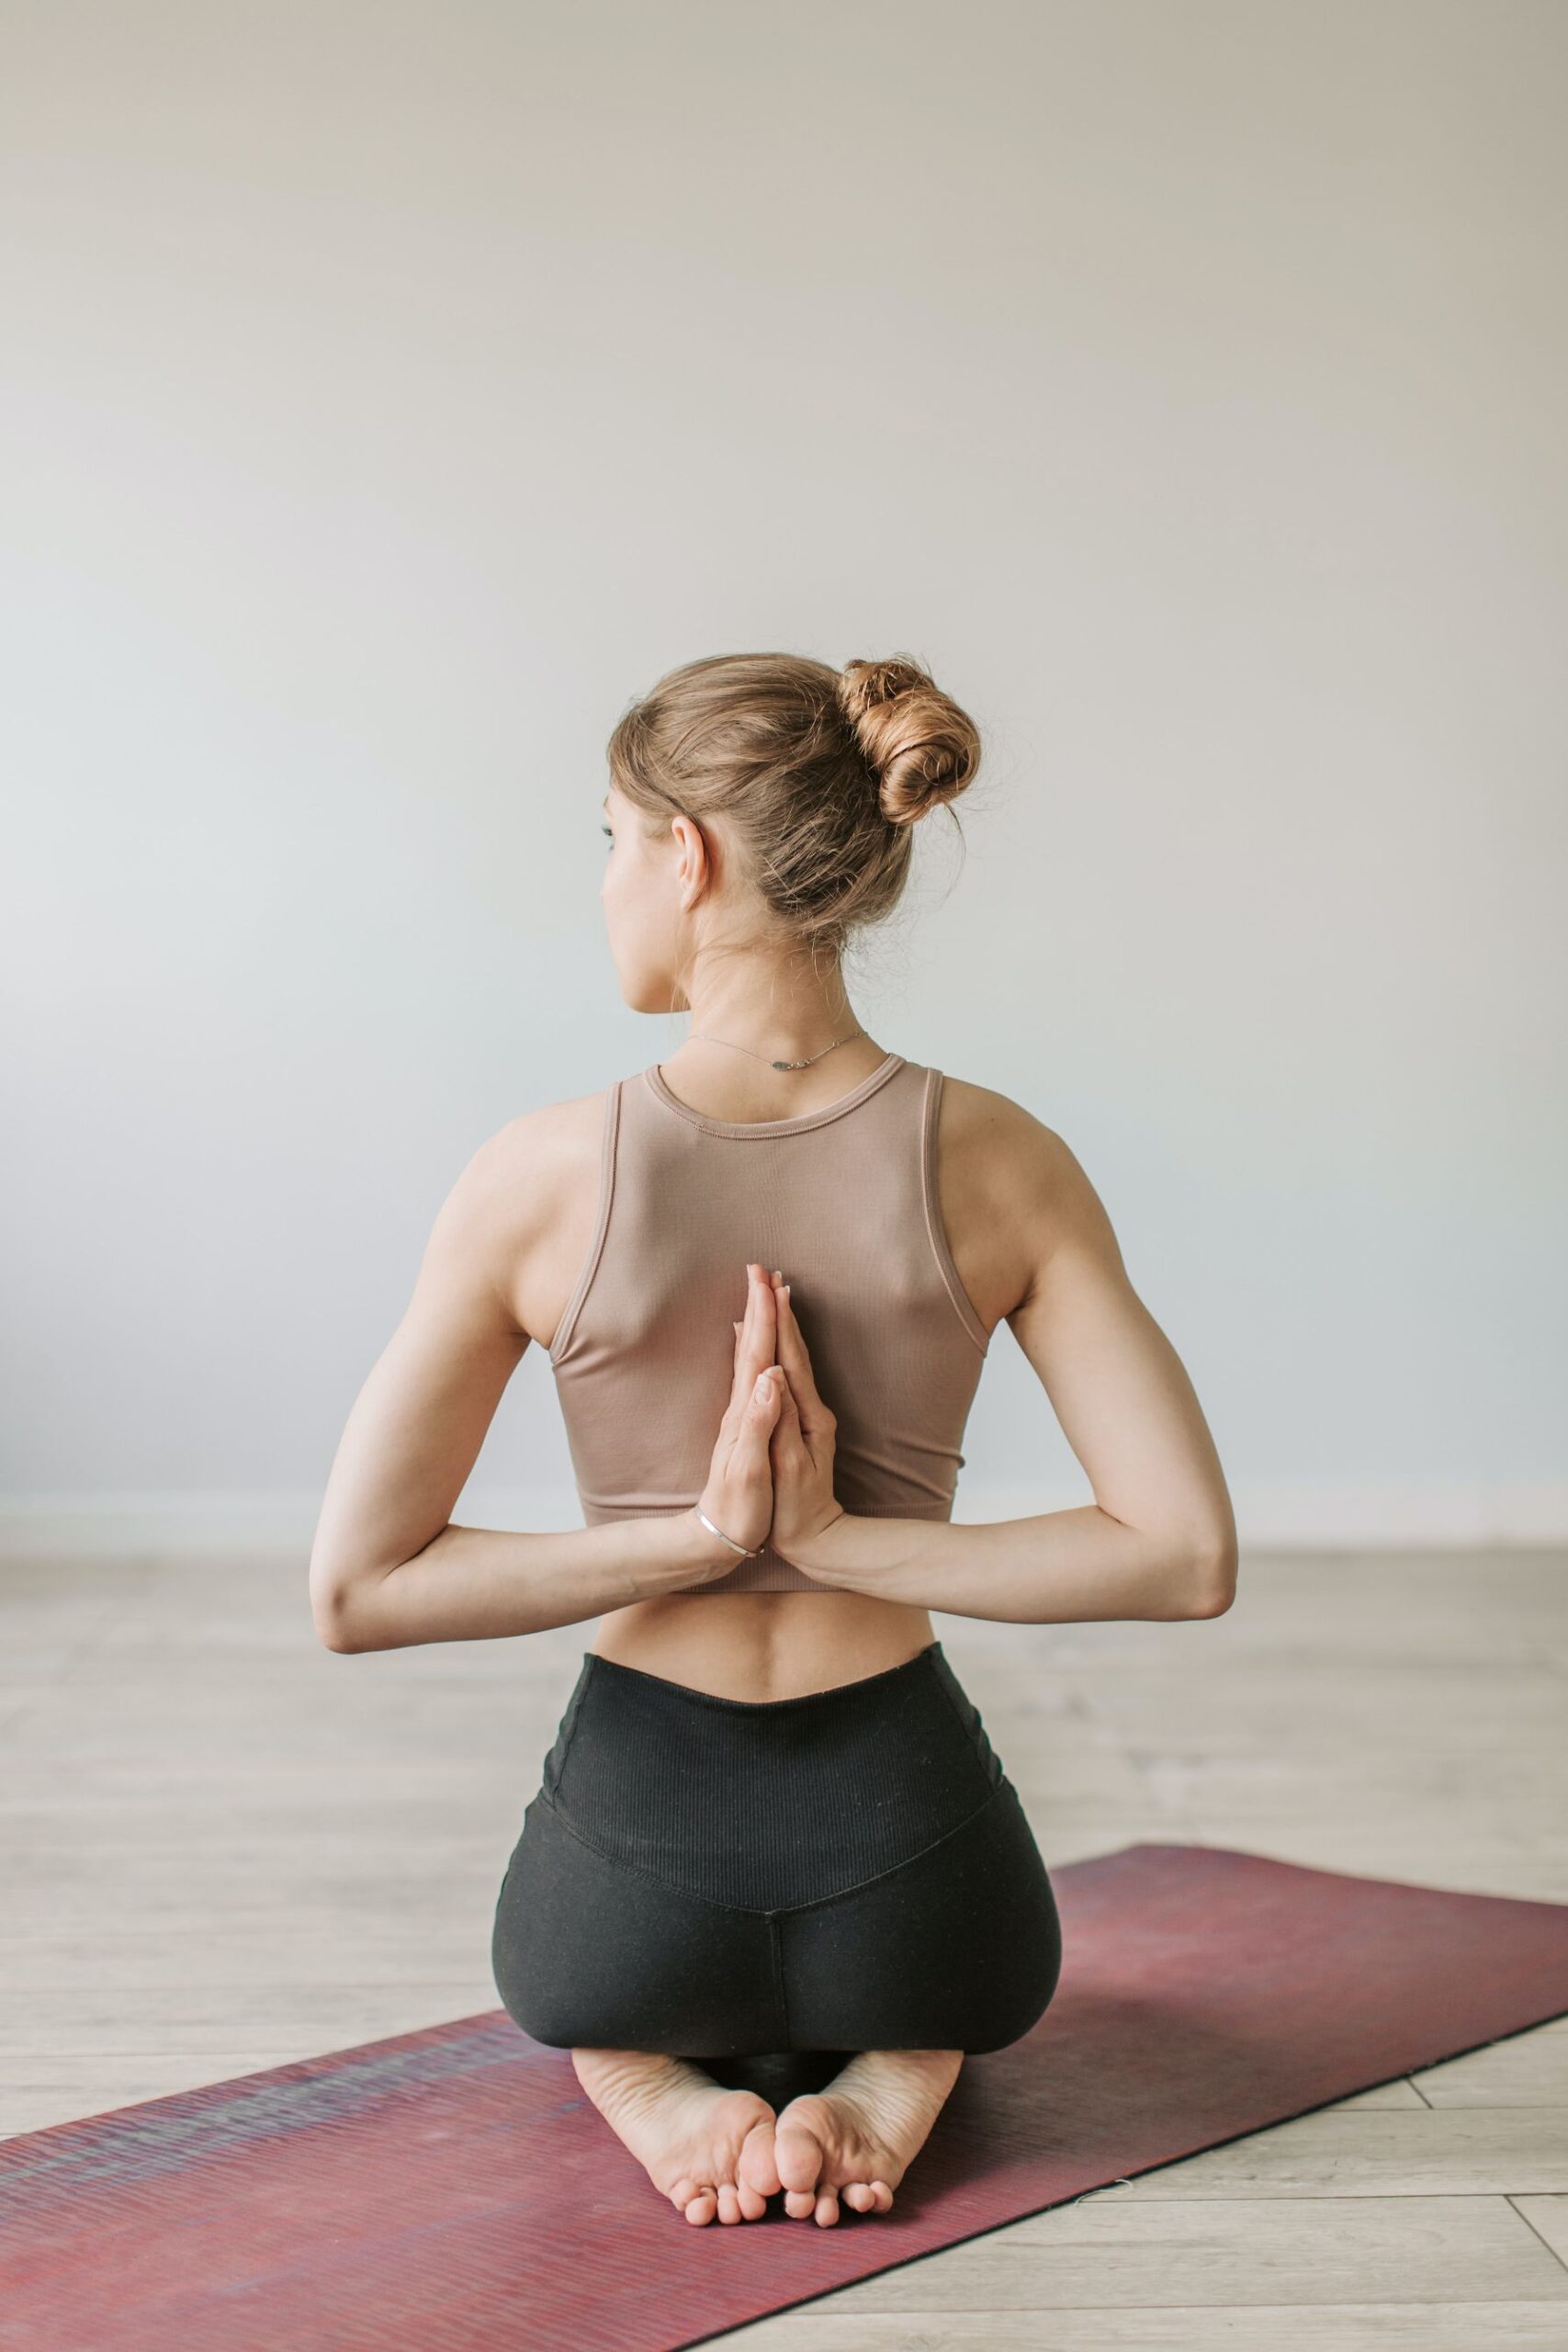 How to fit a Yoga session into your busy routine